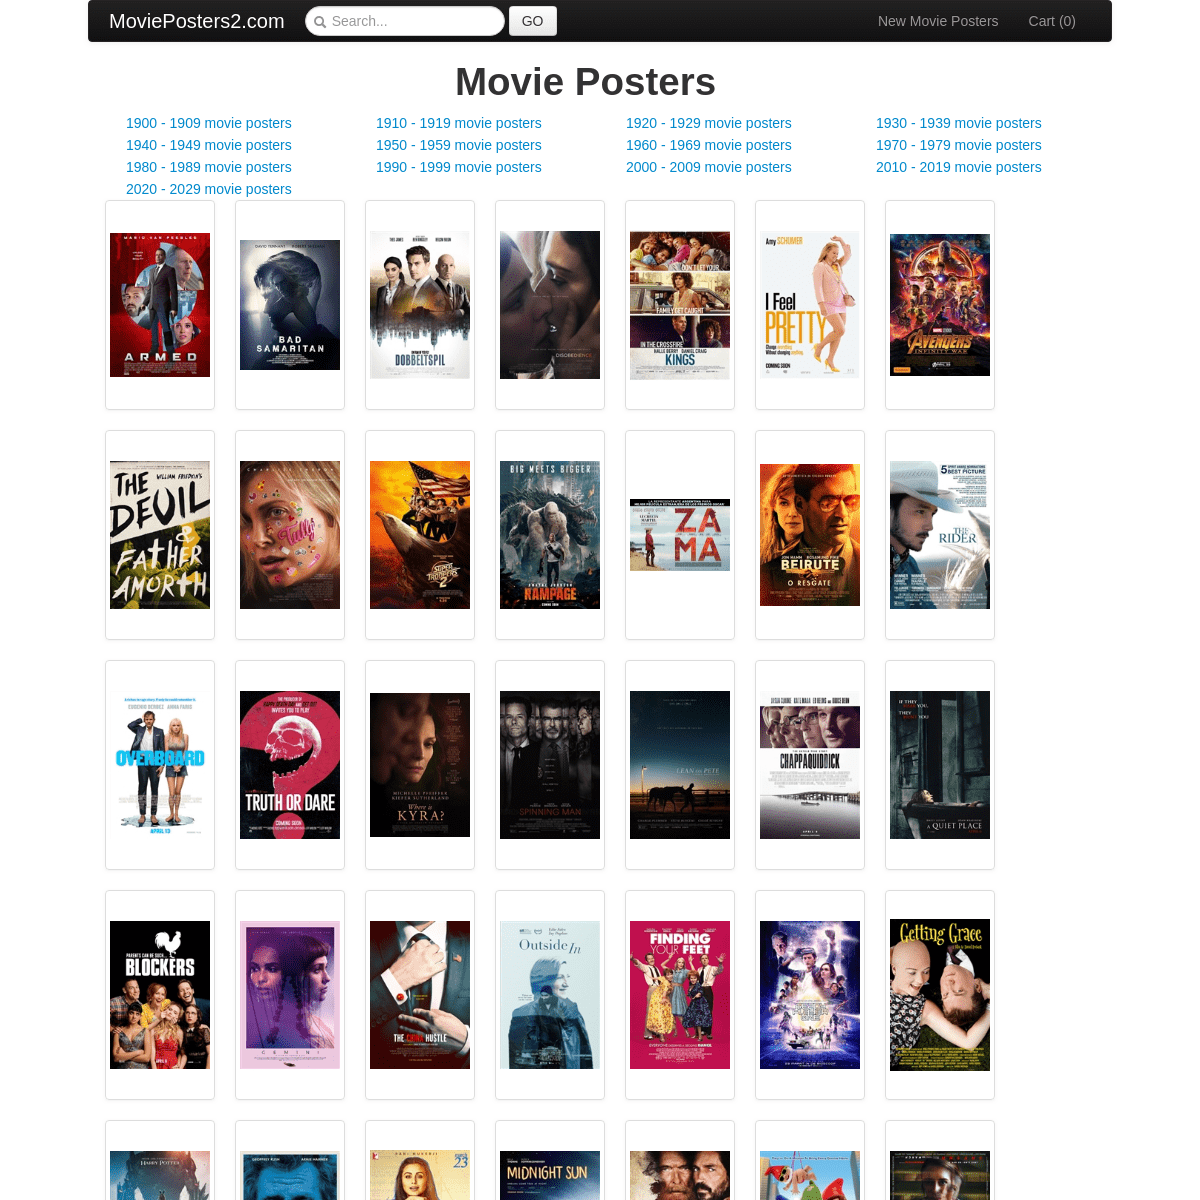 A complete backup of movieposters2.com